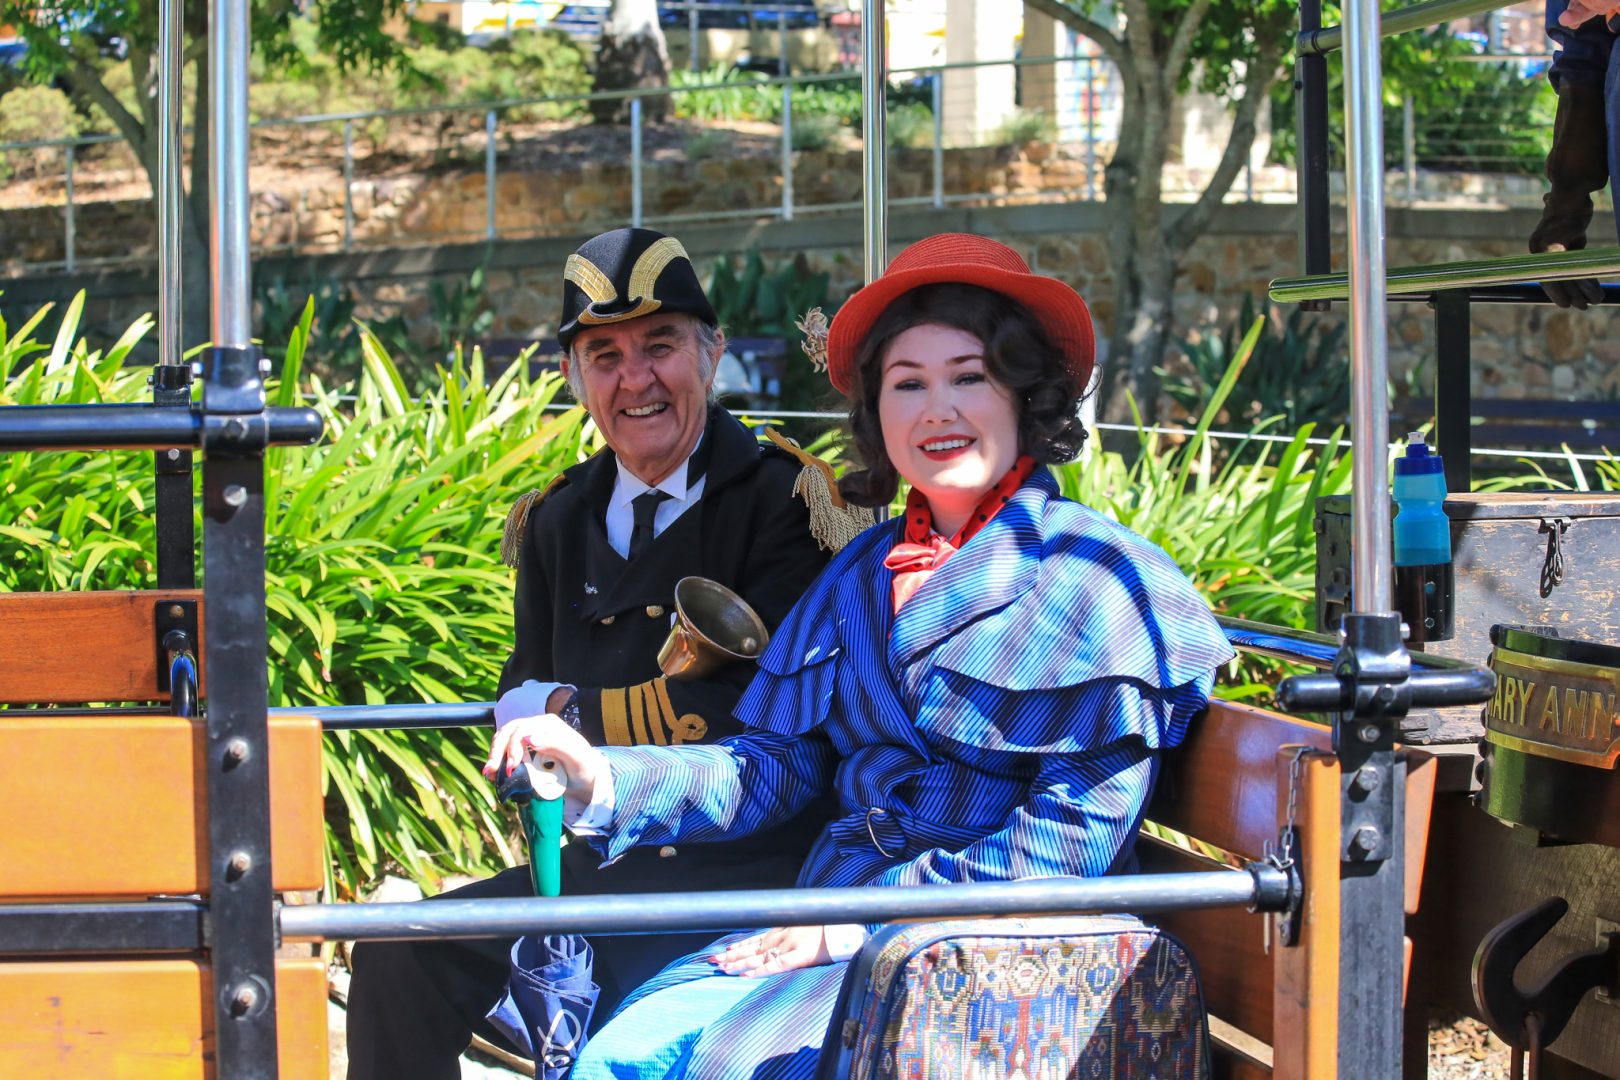 The Mary Poppins Festival celebrates 16 years of storytelling through time in 2023